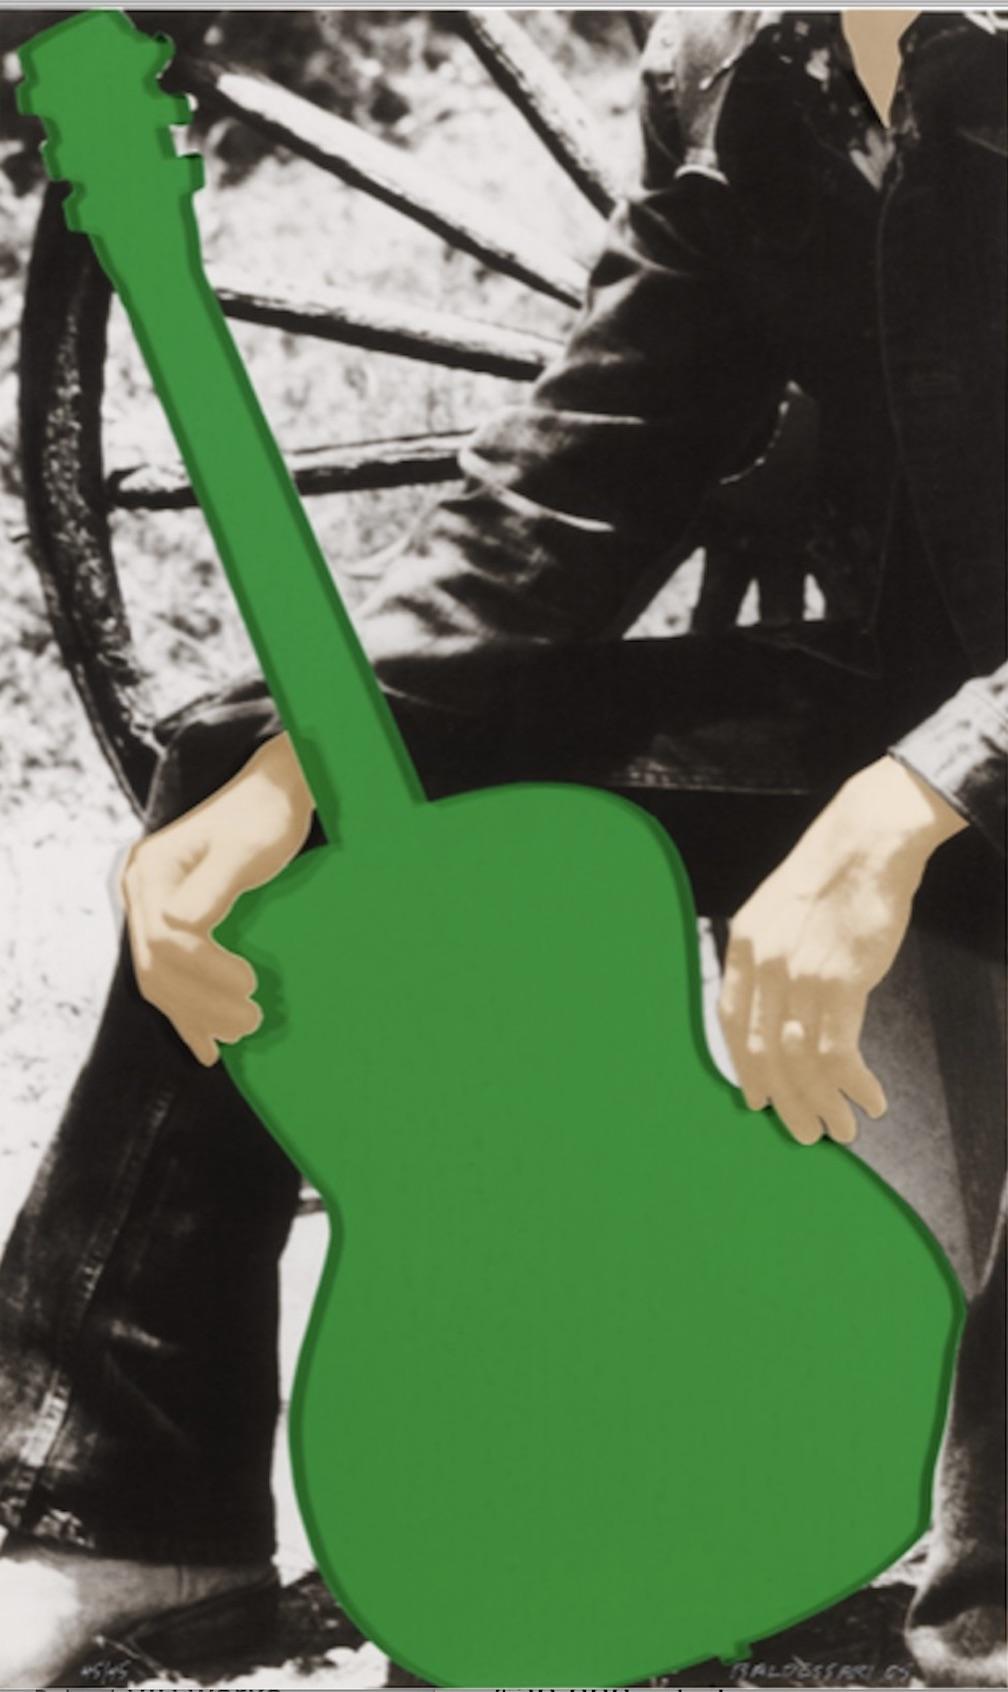 Person with Guitar (Green) - Painting by John Baldessari